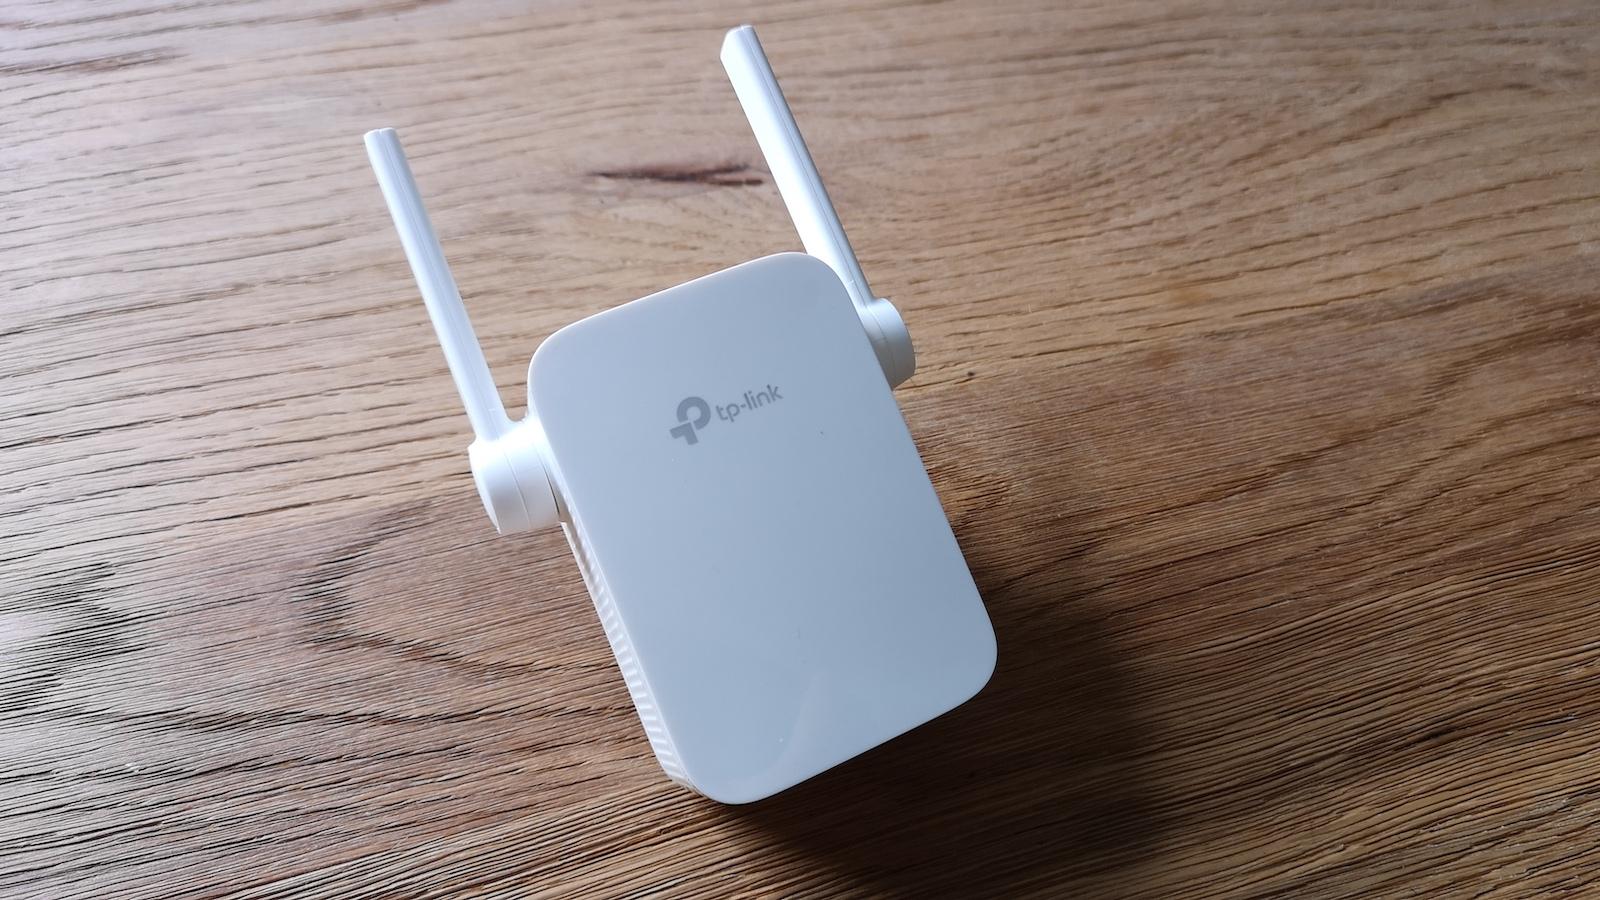 TP-Link RE305 Wi-Fi Range Extender - Best Overall